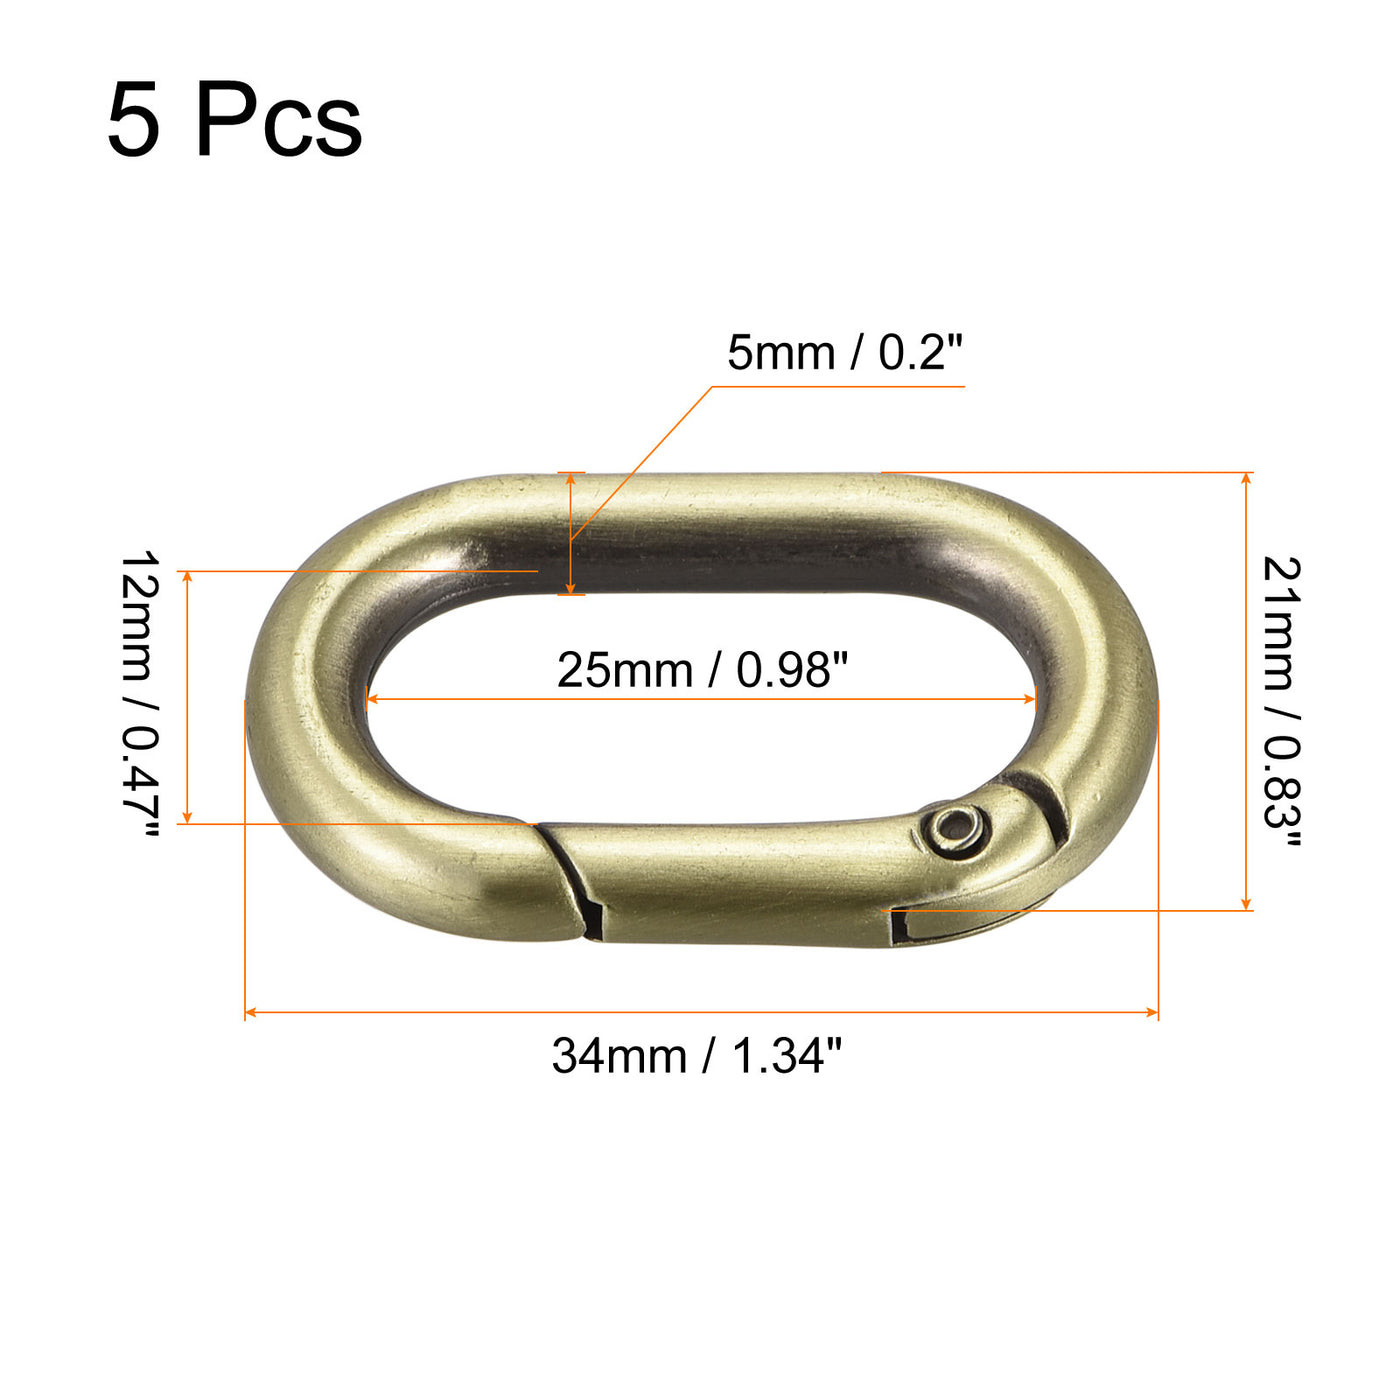 uxcell Uxcell 1.34" Spring Oval Ring Snap Clip Trigger for Bag Purse Keychain, 5Pcs Bronze